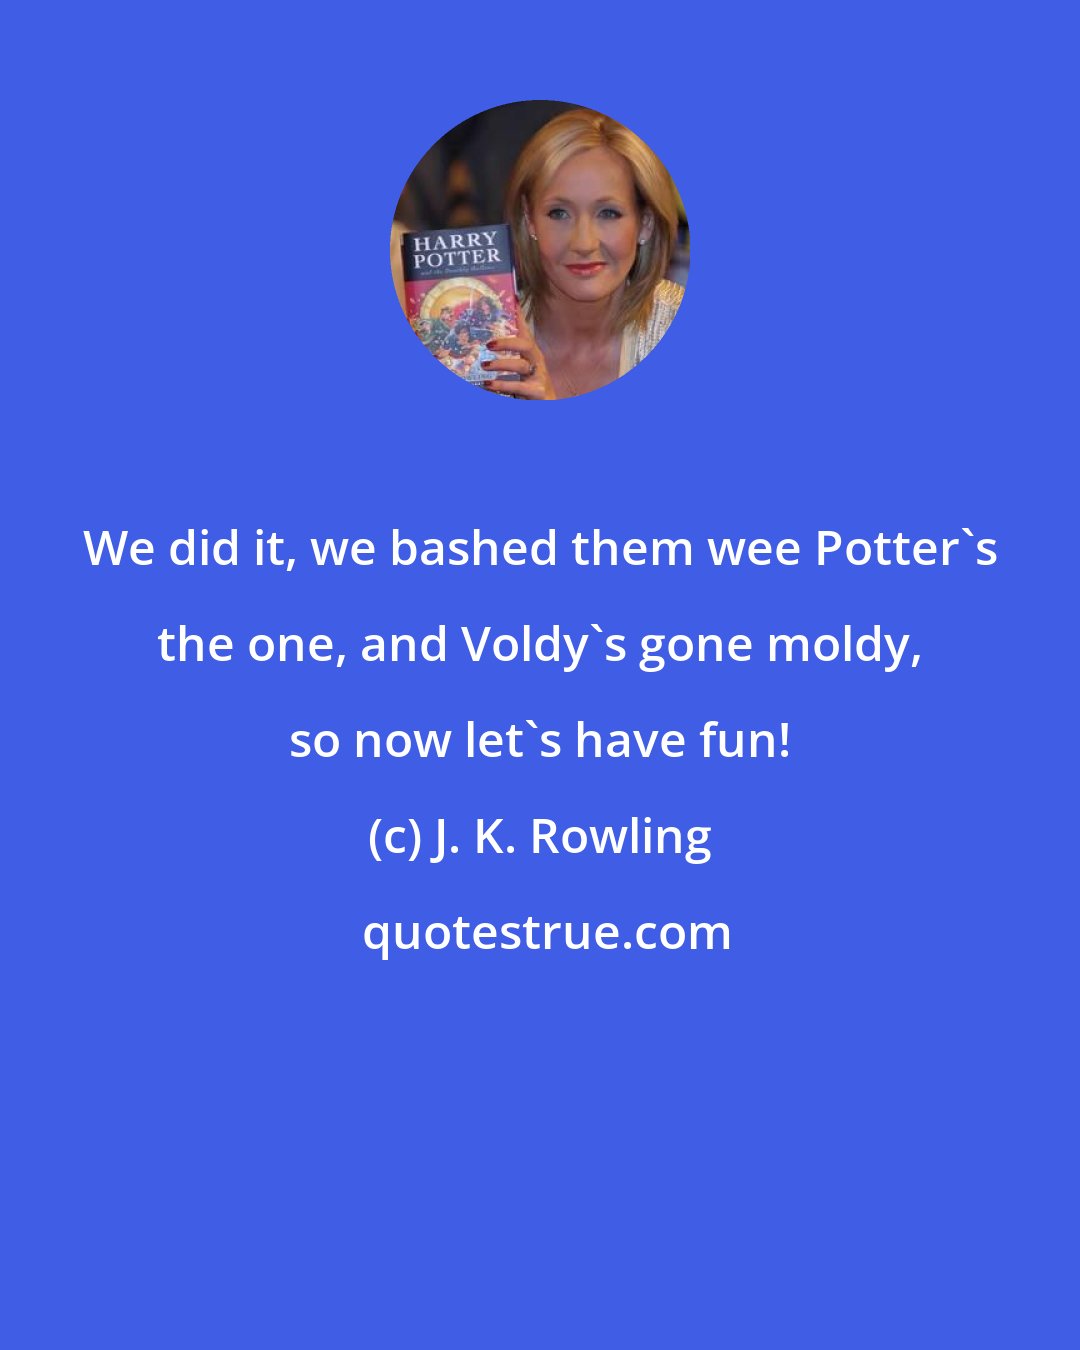 J. K. Rowling: We did it, we bashed them wee Potter's the one, and Voldy's gone moldy, so now let's have fun!